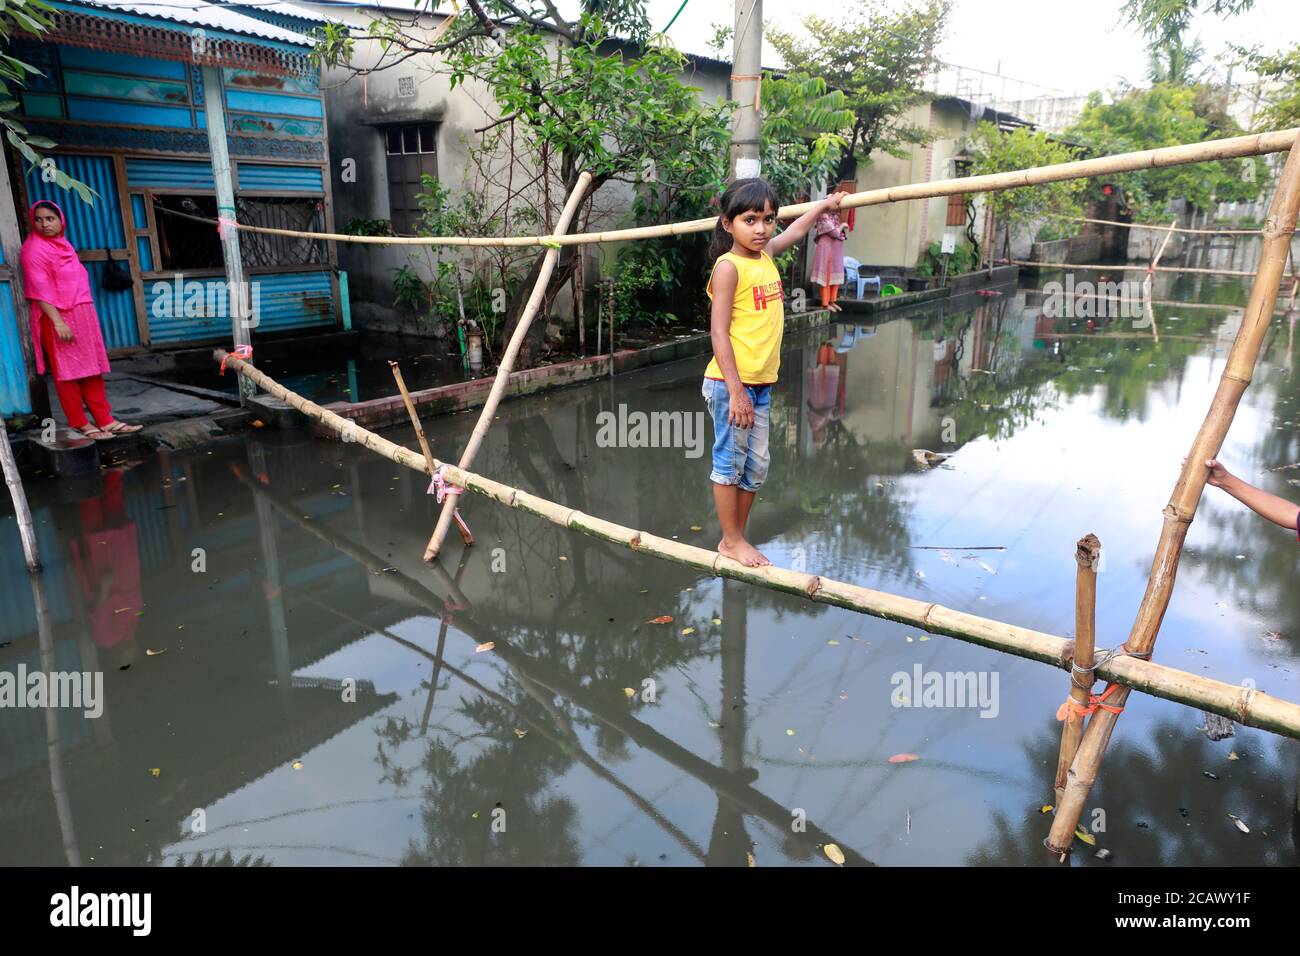 Narayanganj, Bangladesh - August 09, 2020: Bamboo bridges have become the only means of transportation for the people of the waterlogged BSCIC Jamdai Stock Photo